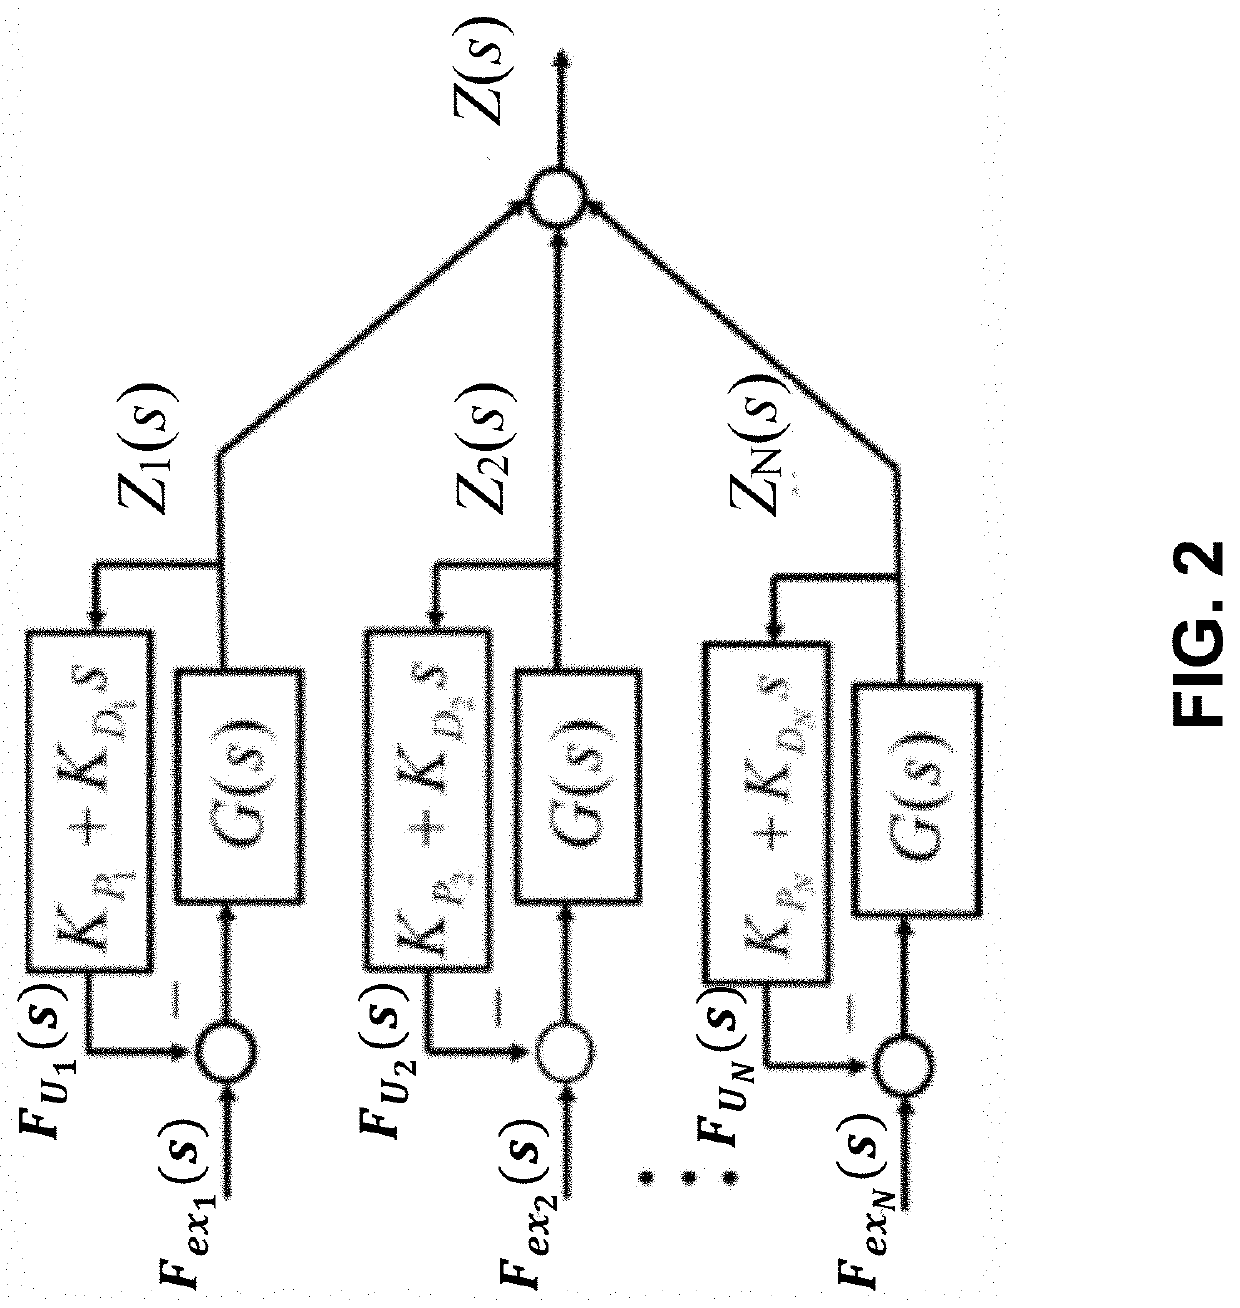 Nonlinear controller for nonlinear wave energy converters